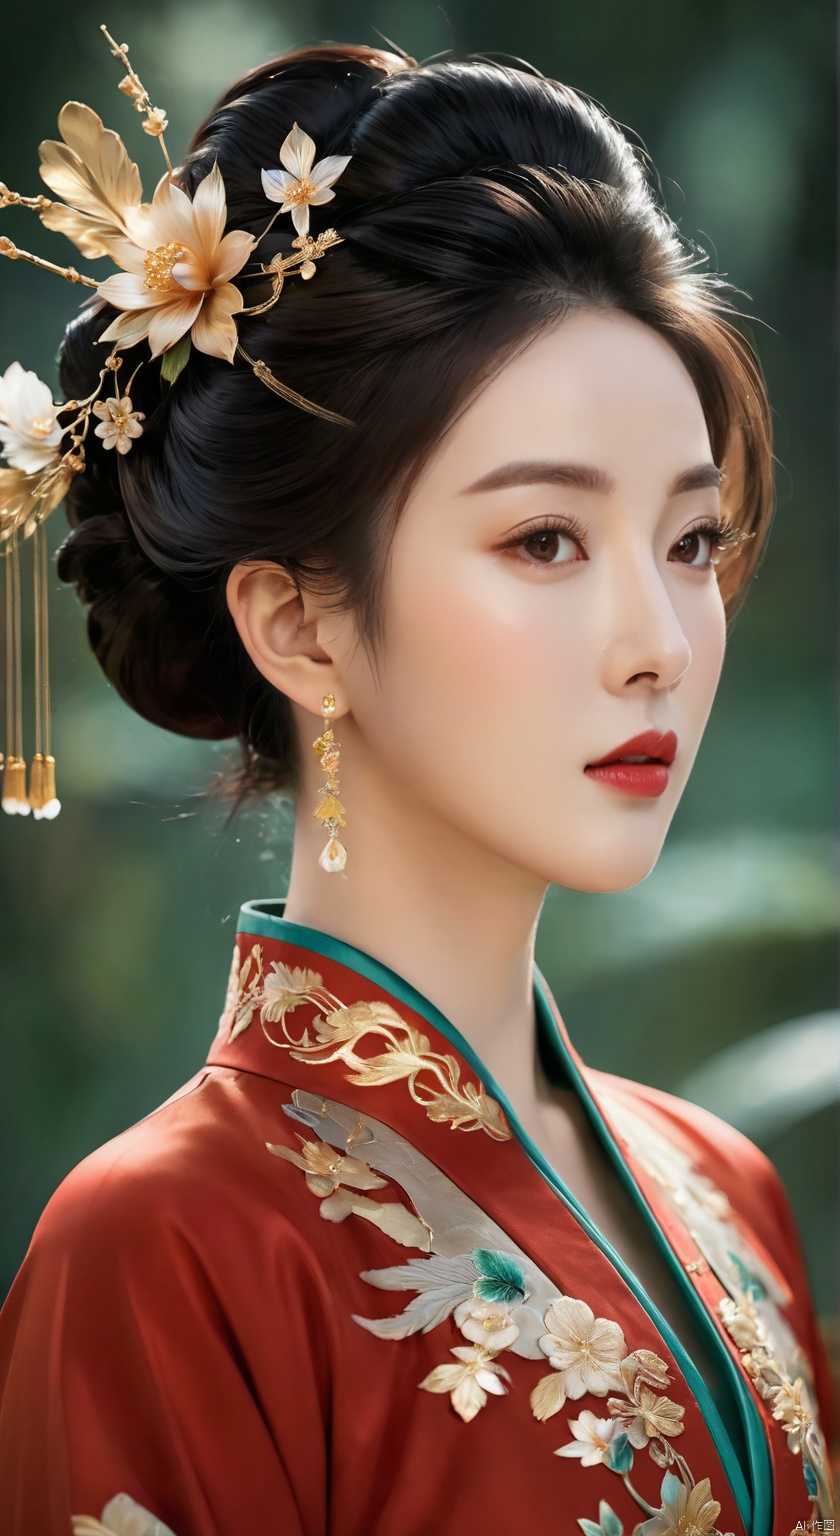 Masterpiece, ultra-high-definition 8K wallpaper, finest quality, a graceful and commanding ancient Chinese noblewoman depicted in a surrealistic and detailed style, with clear and distinct textures, rendered in photorealistic CG, set against a cinematically lit backdrop, featuring:
A striking and intricately designed hairdo with a golden  hairpin, adorned with 8 peals.
An upper garment: a luxurious vermilion (rich red) Hanfu jacket with a high collar, featuring flowing sleeves and delicate gold embroidery that accentuates its traditional elegance.
A lower garment: an emerald green skirt that flows and complements the upper jacket, with subtle pleats and additional gold embroidery that matches the jacket's design, ensuring the colors are not mixed or confused., guangying on face, hubggirl